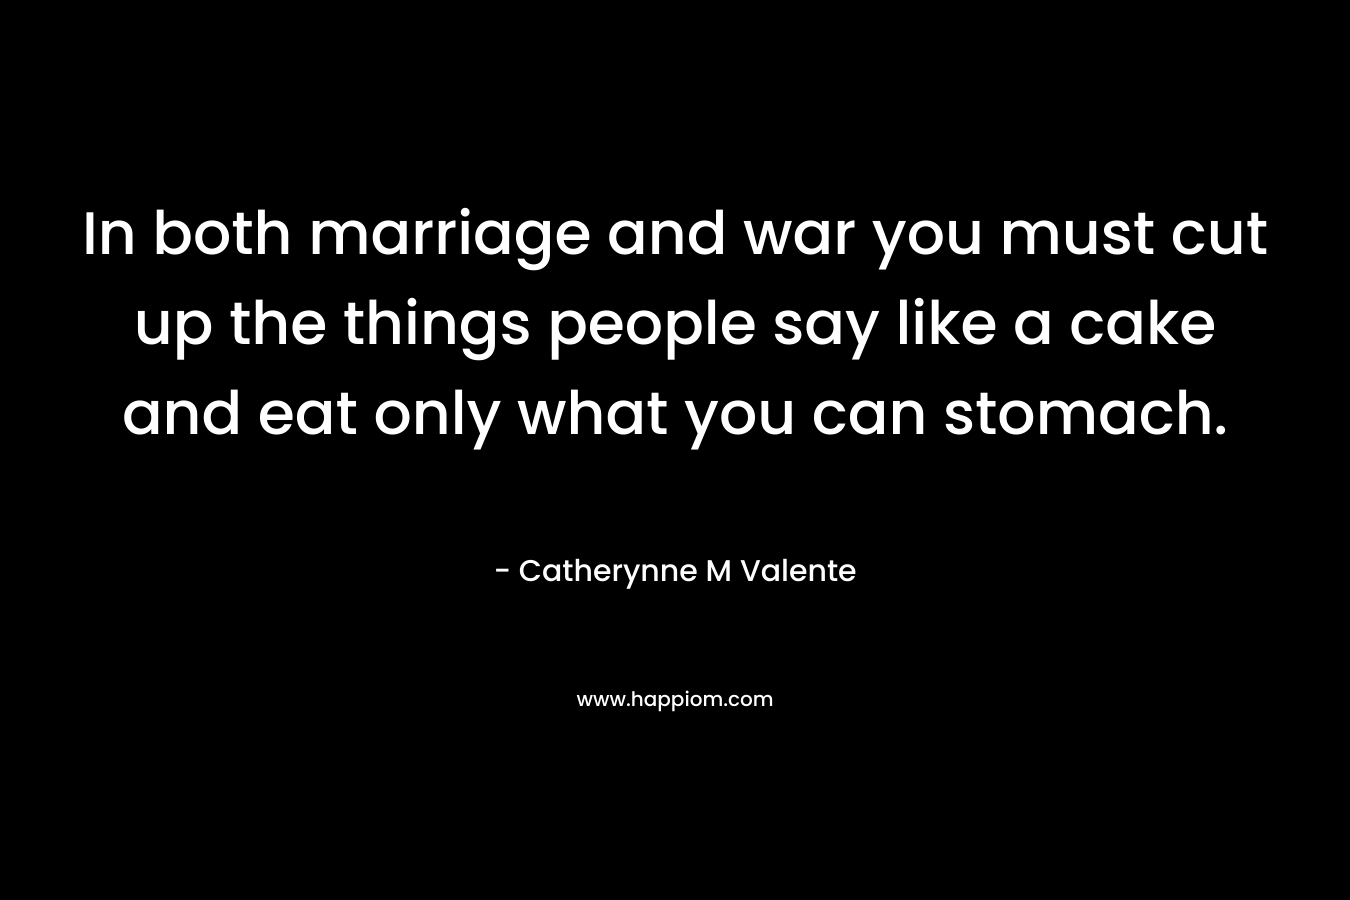 In both marriage and war you must cut up the things people say like a cake and eat only what you can stomach.